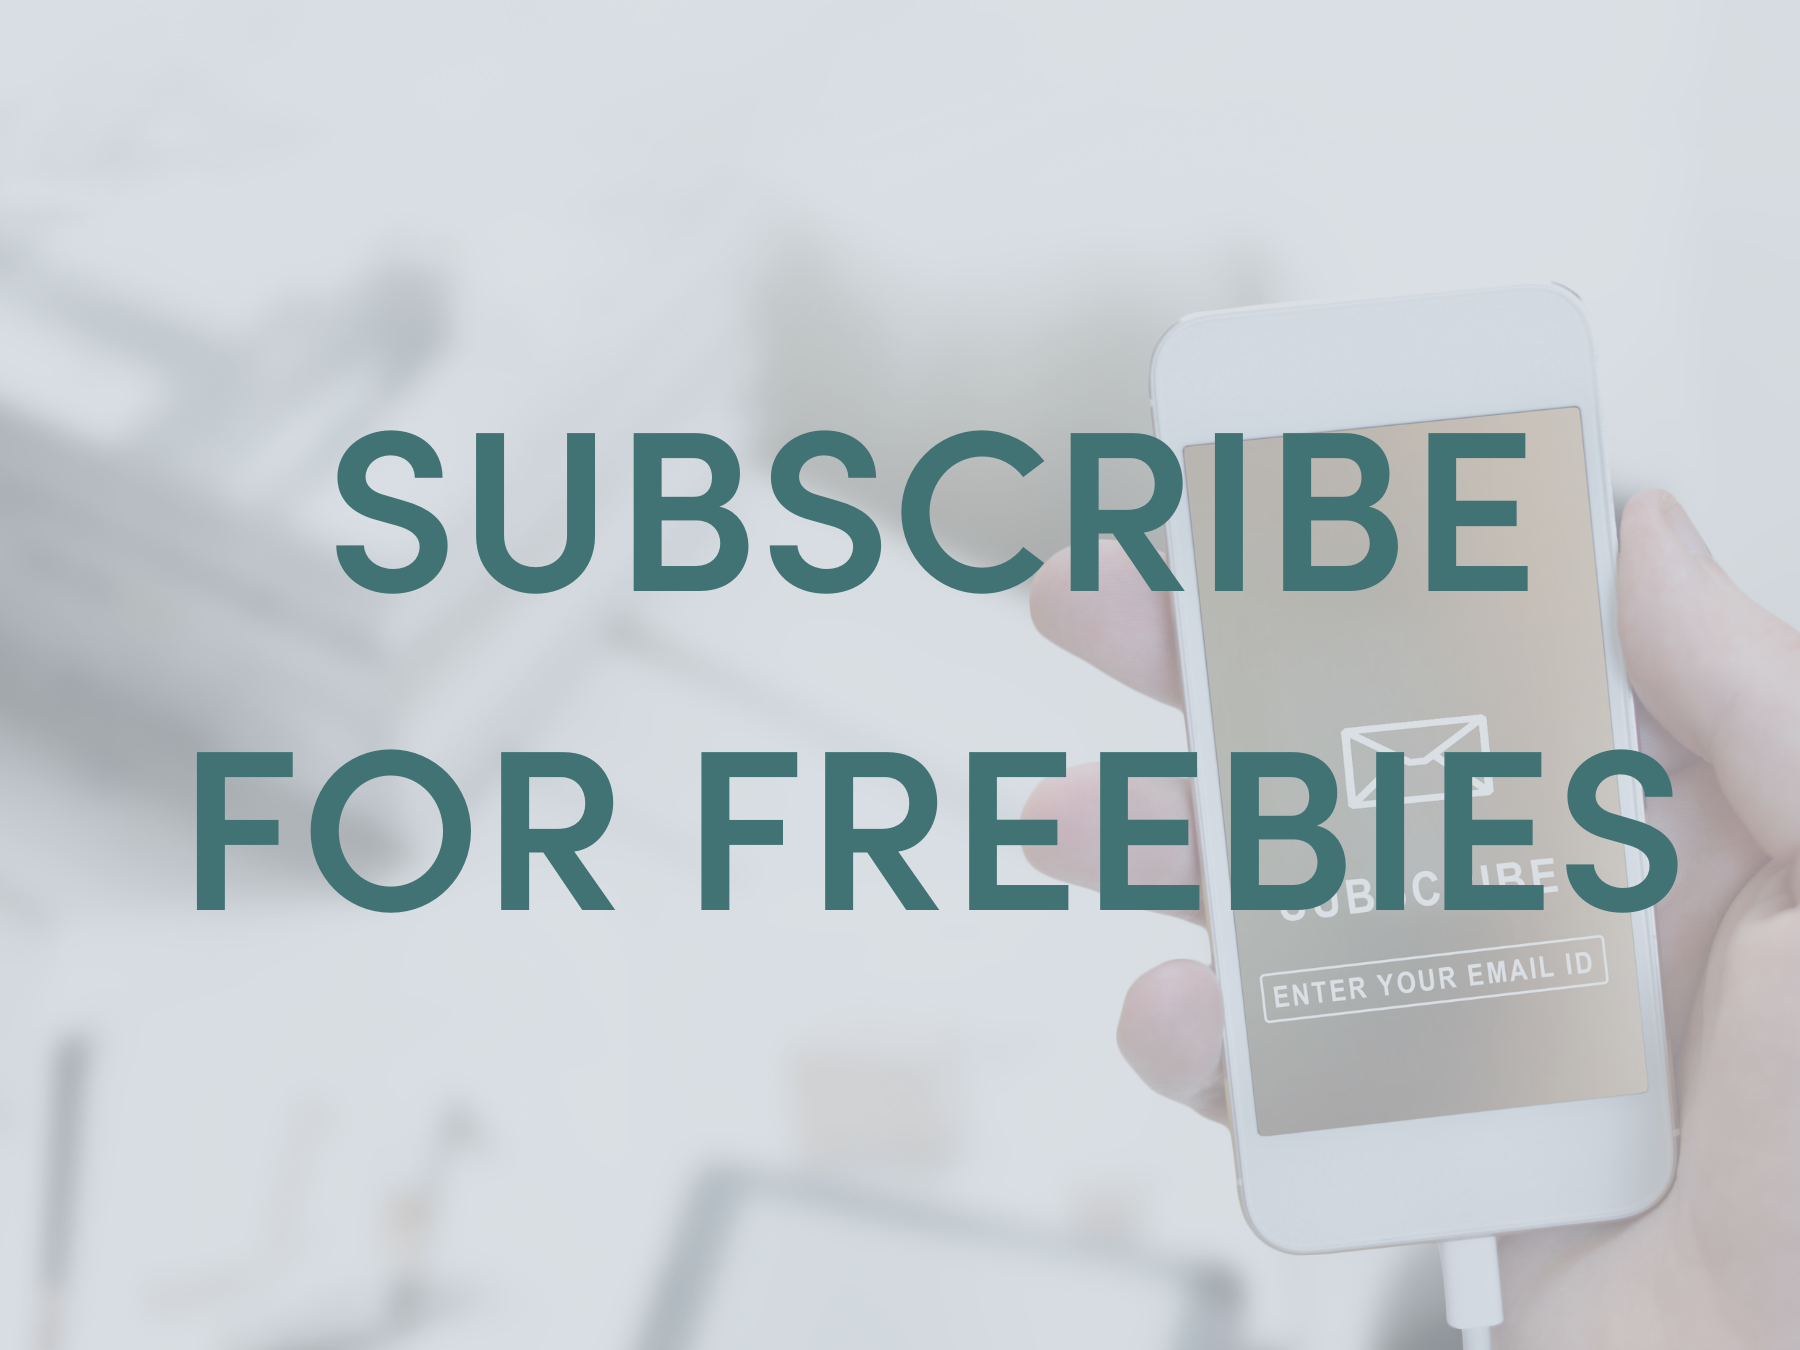 SUBSCRIBE FOR FREEBIES